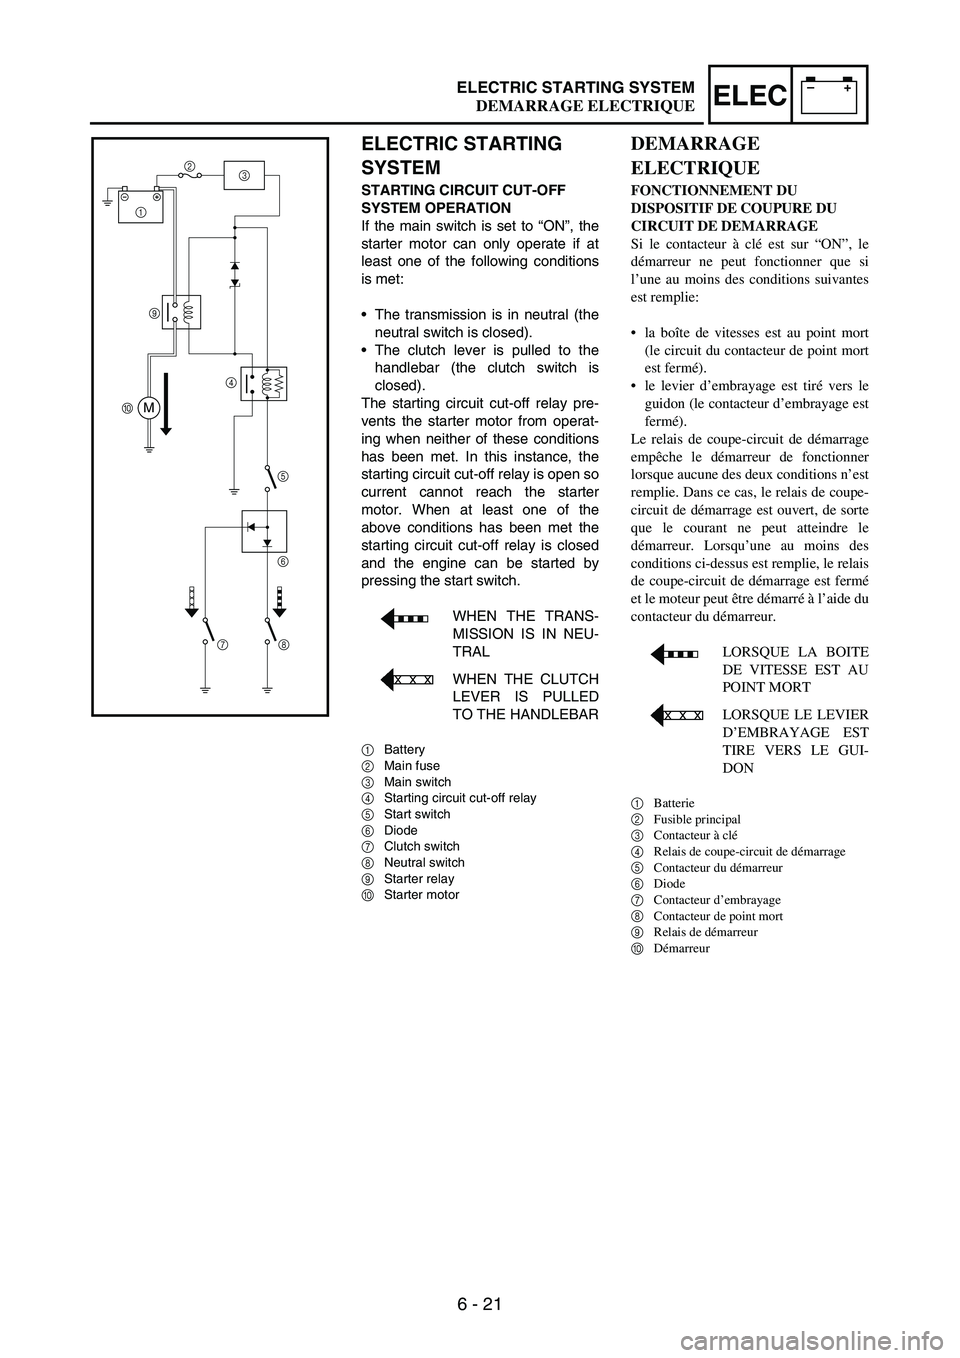 YAMAHA WR 250F 2005  Manuale de Empleo (in Spanish) 6 - 21
–+ELECELECTRIC STARTING SYSTEM
ELECTRIC STARTING 
SYSTEM
STARTING CIRCUIT CUT-OFF 
SYSTEM OPERATION
If the main switch is set to “ON”, the
starter motor can only operate if at
least one o